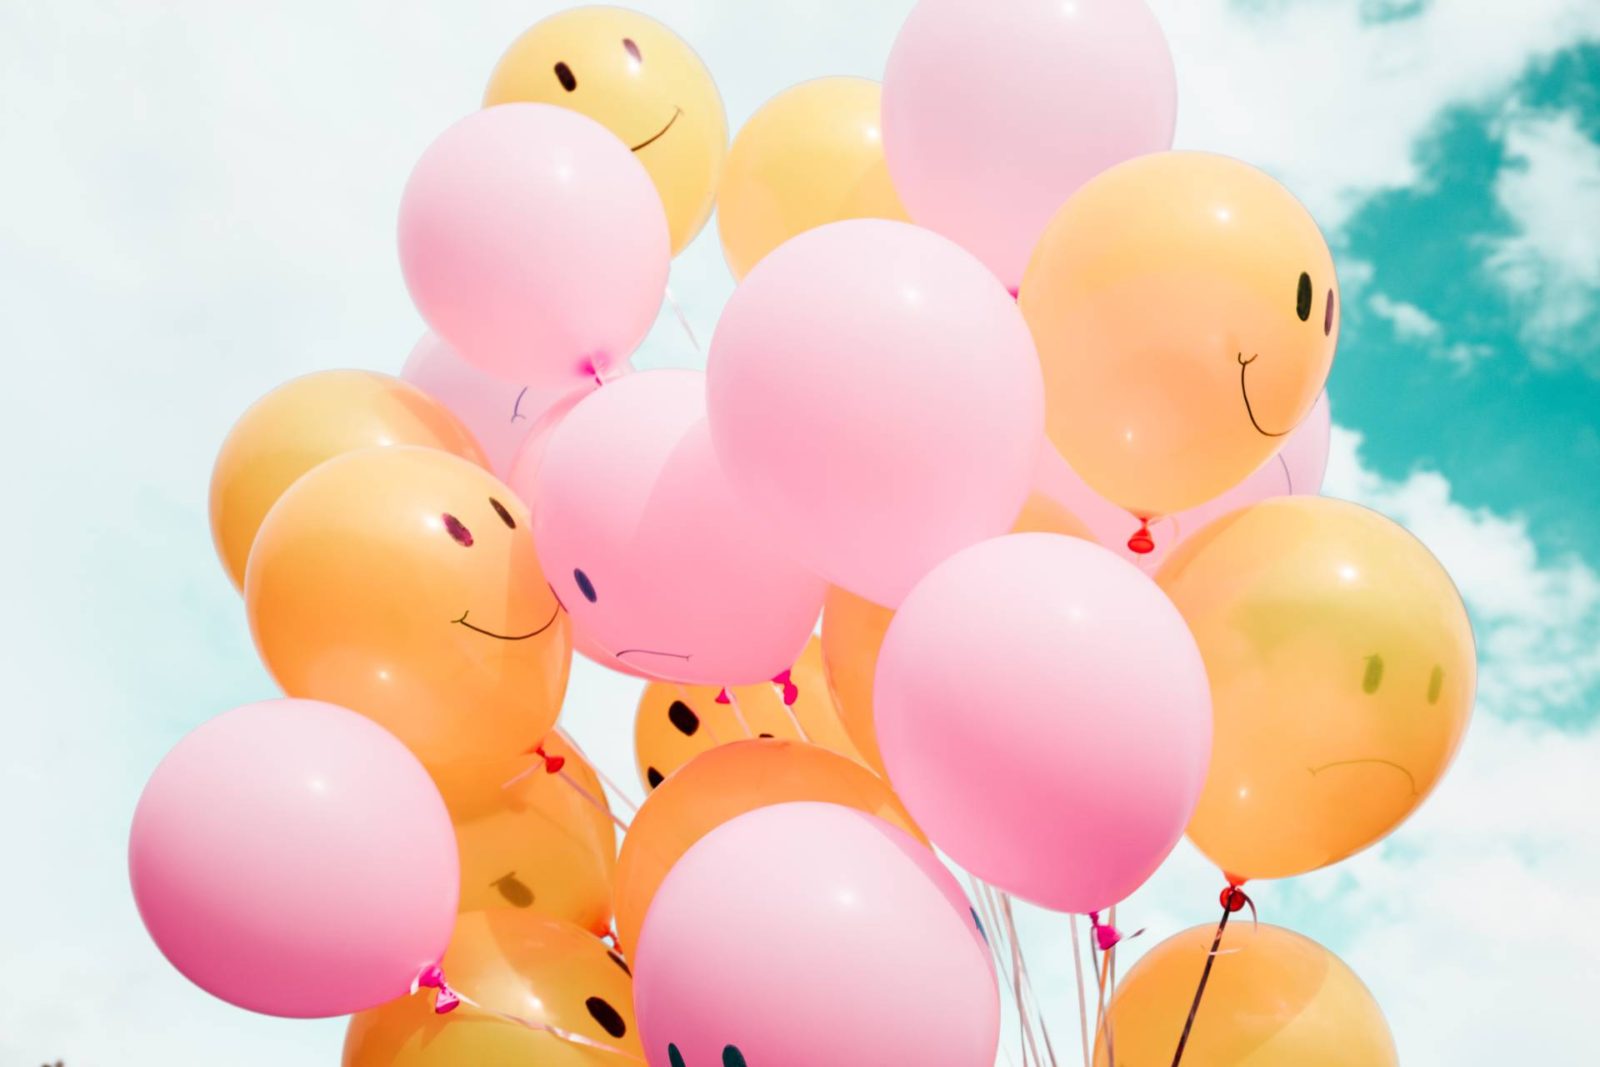 Bunch of pink and orange balloons with smiley faces drawn on